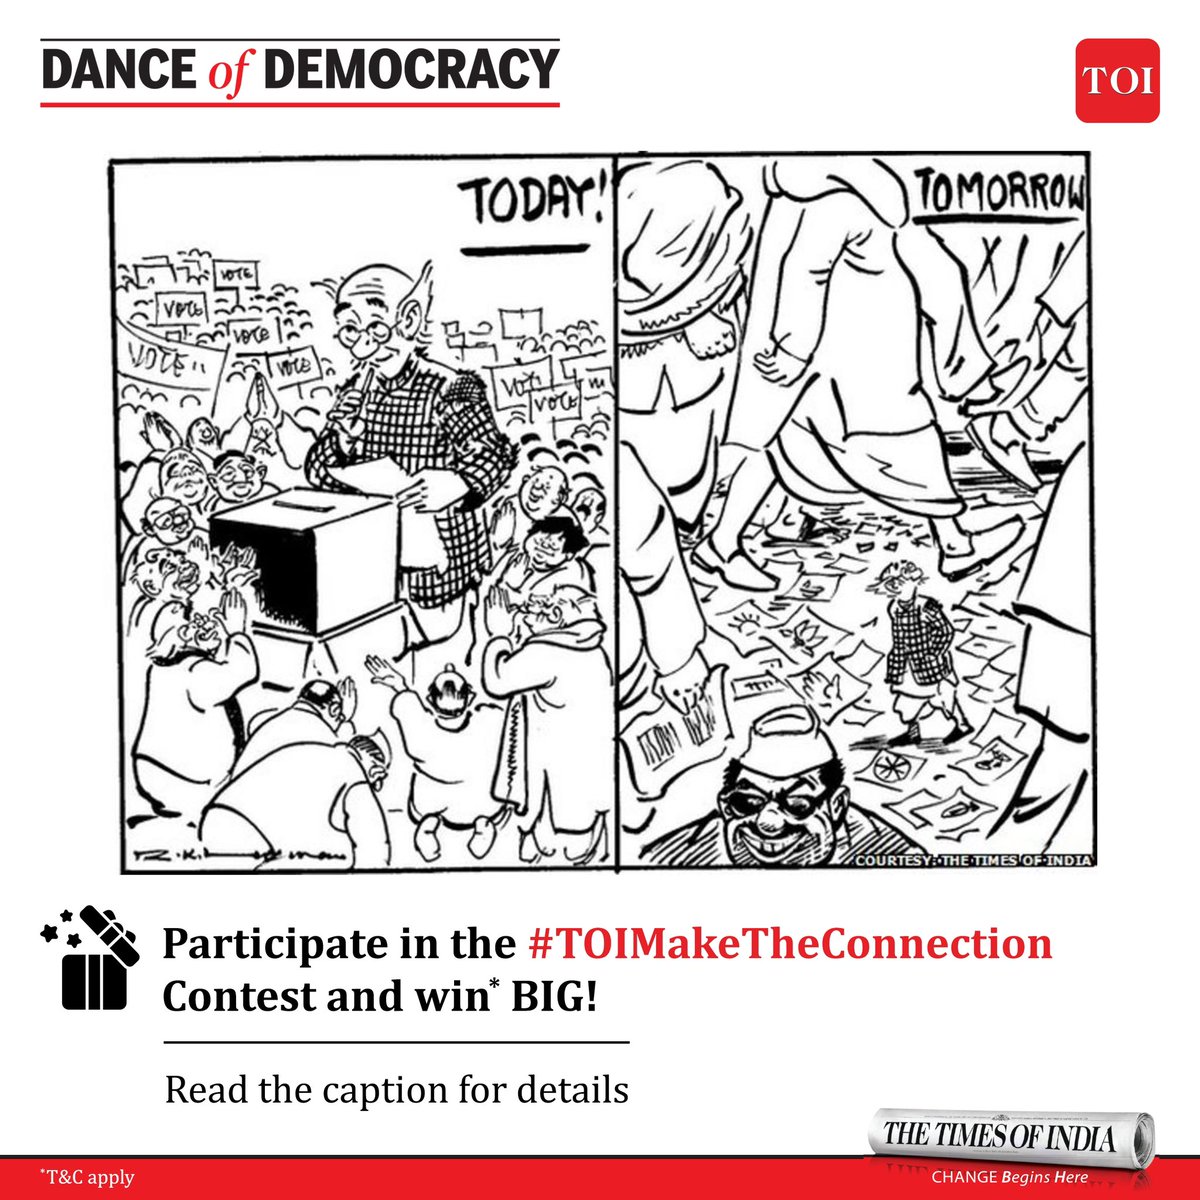 HURRY! Entry closes at midnight! Capture the essence of elections through RK Laxman’s iconic cartoons. If you think you have the knack to Make the connection between 'Then' and 'Now', highlighting what hasn't changed over the years, then here’s your chance to win BIG! RULES